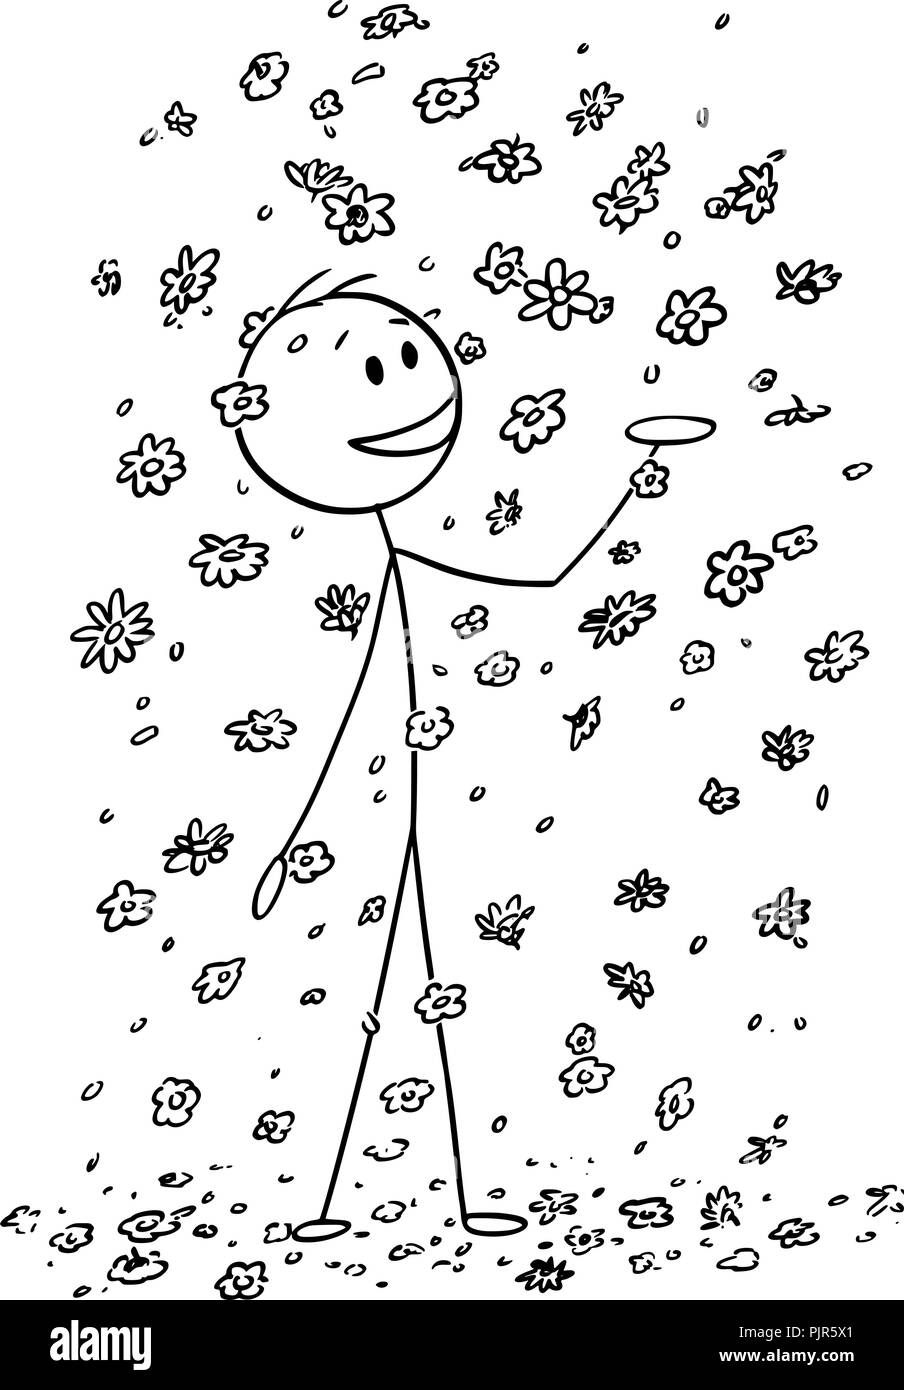 Cartoon of Happy Man Surrounded by Falling Flowers or Blossoms Stock Vector